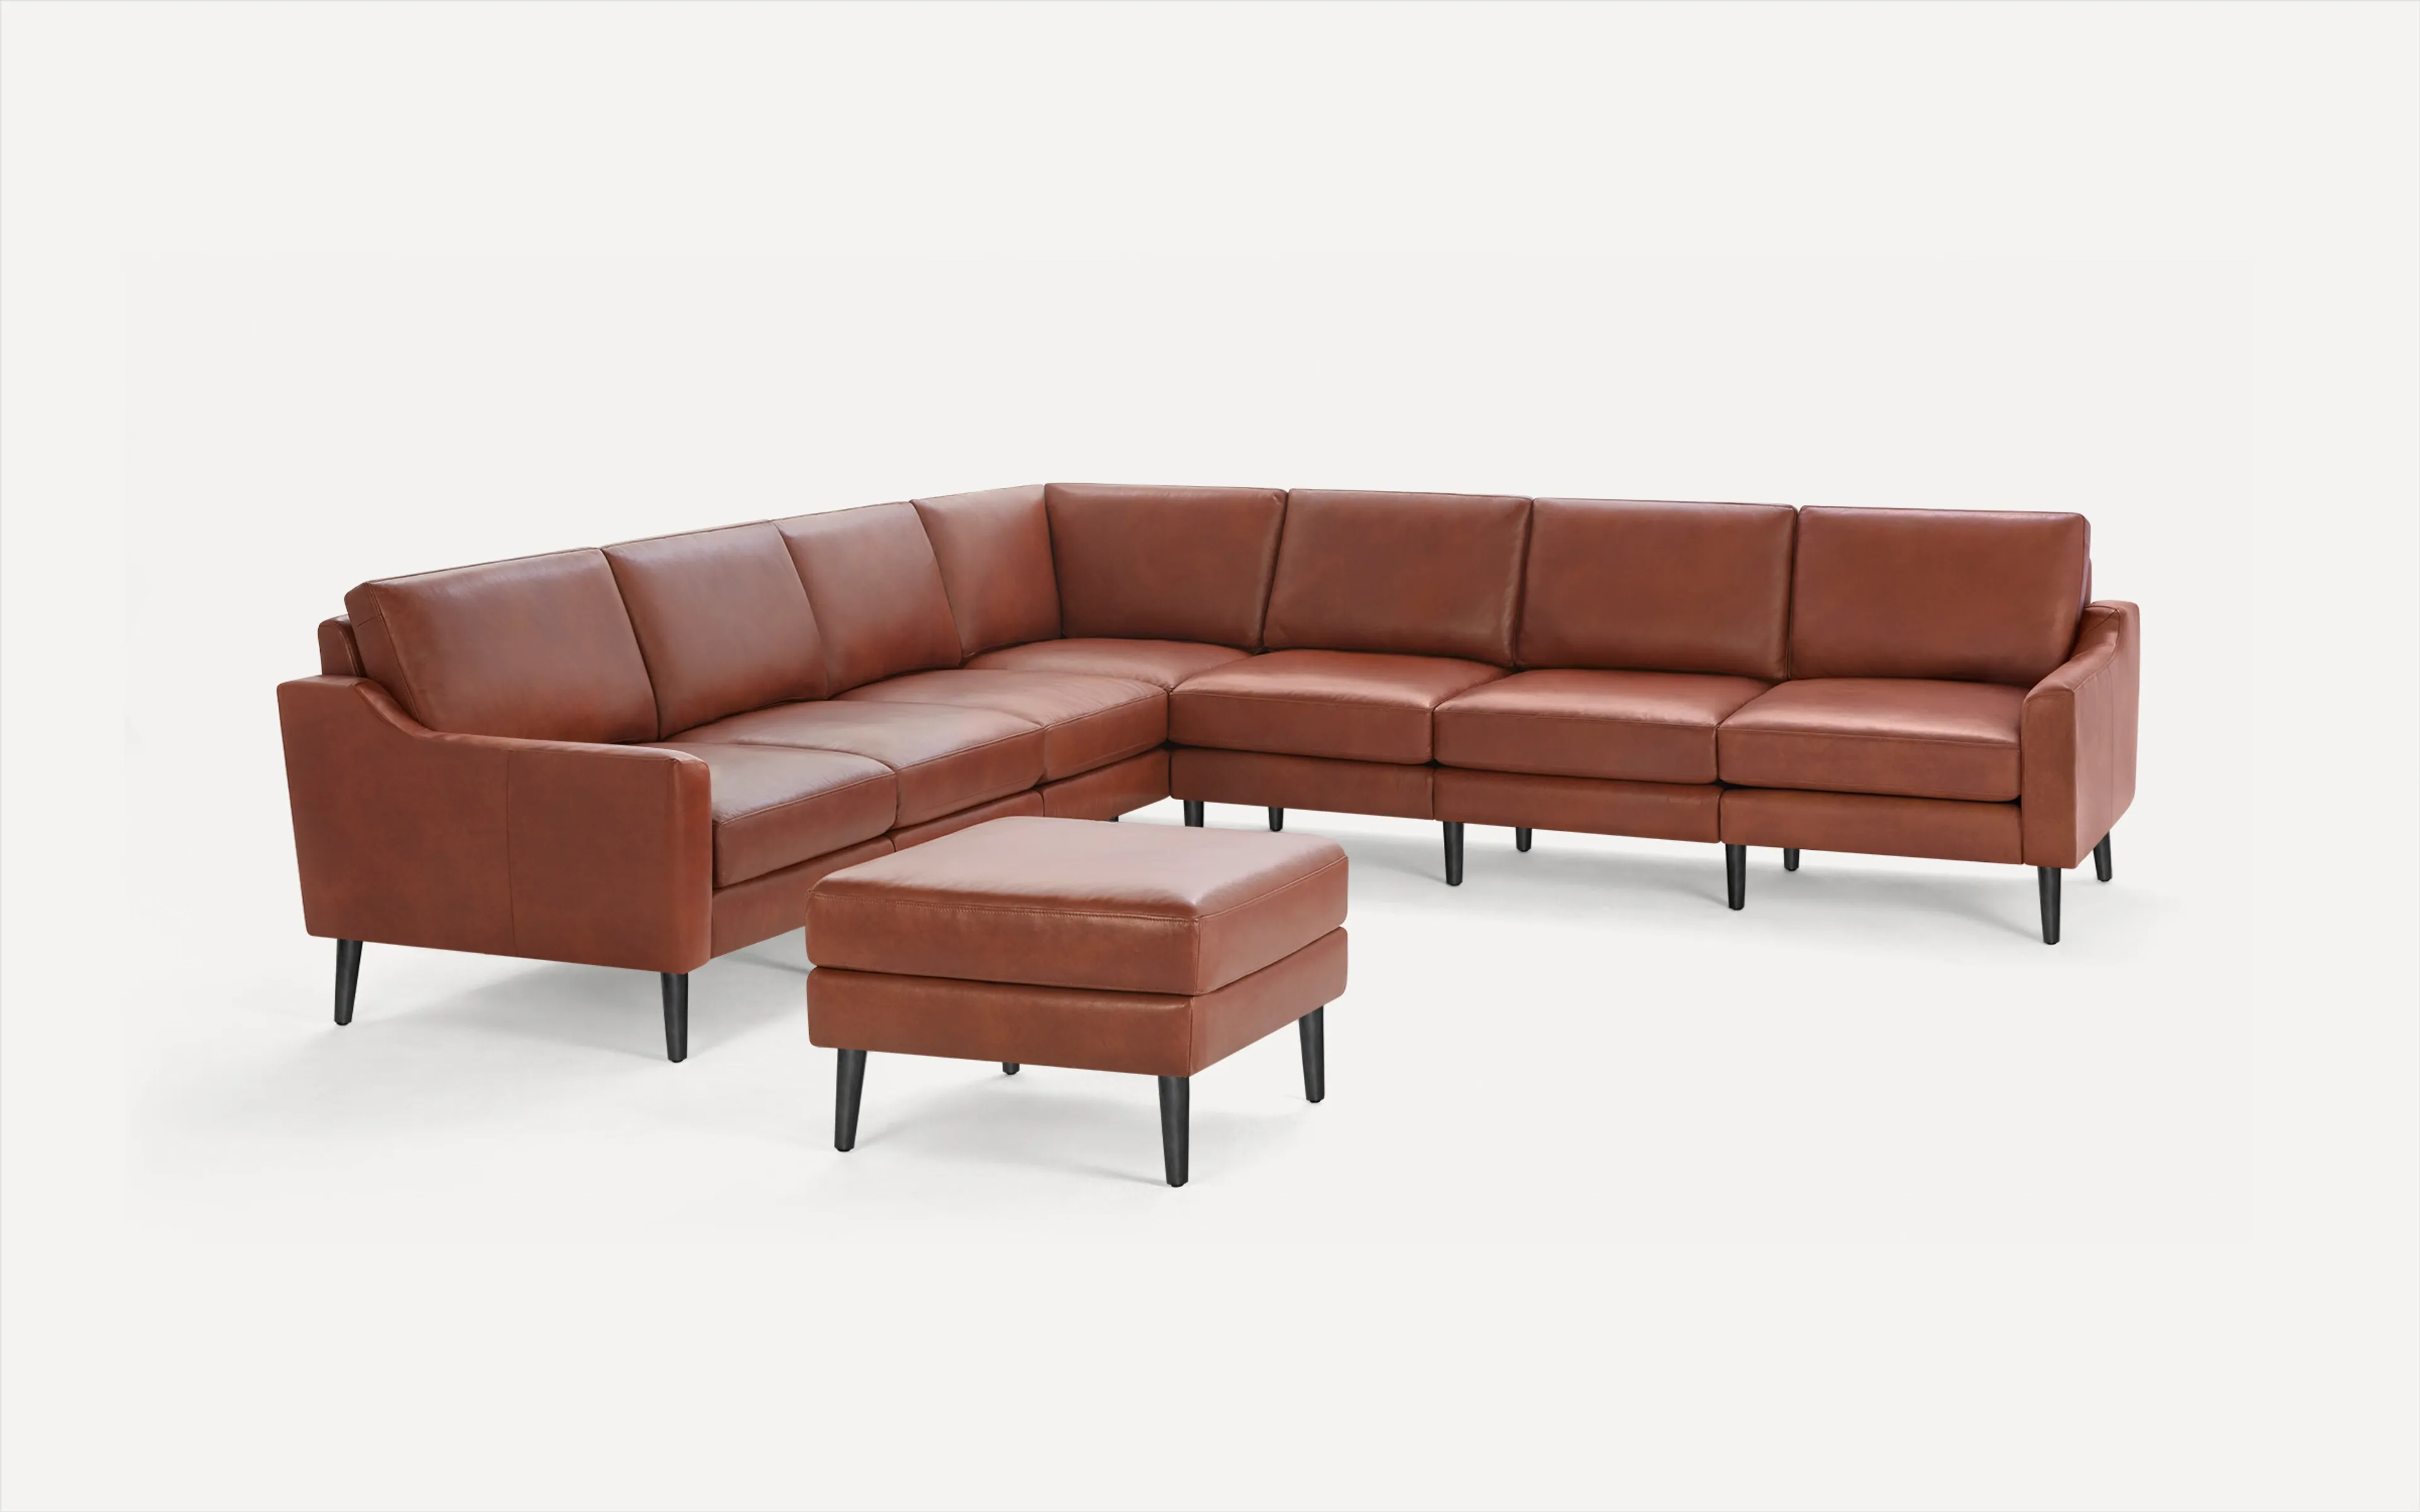 Slope Nomad Leather 7-Seat Corner Sectional with Ottoman